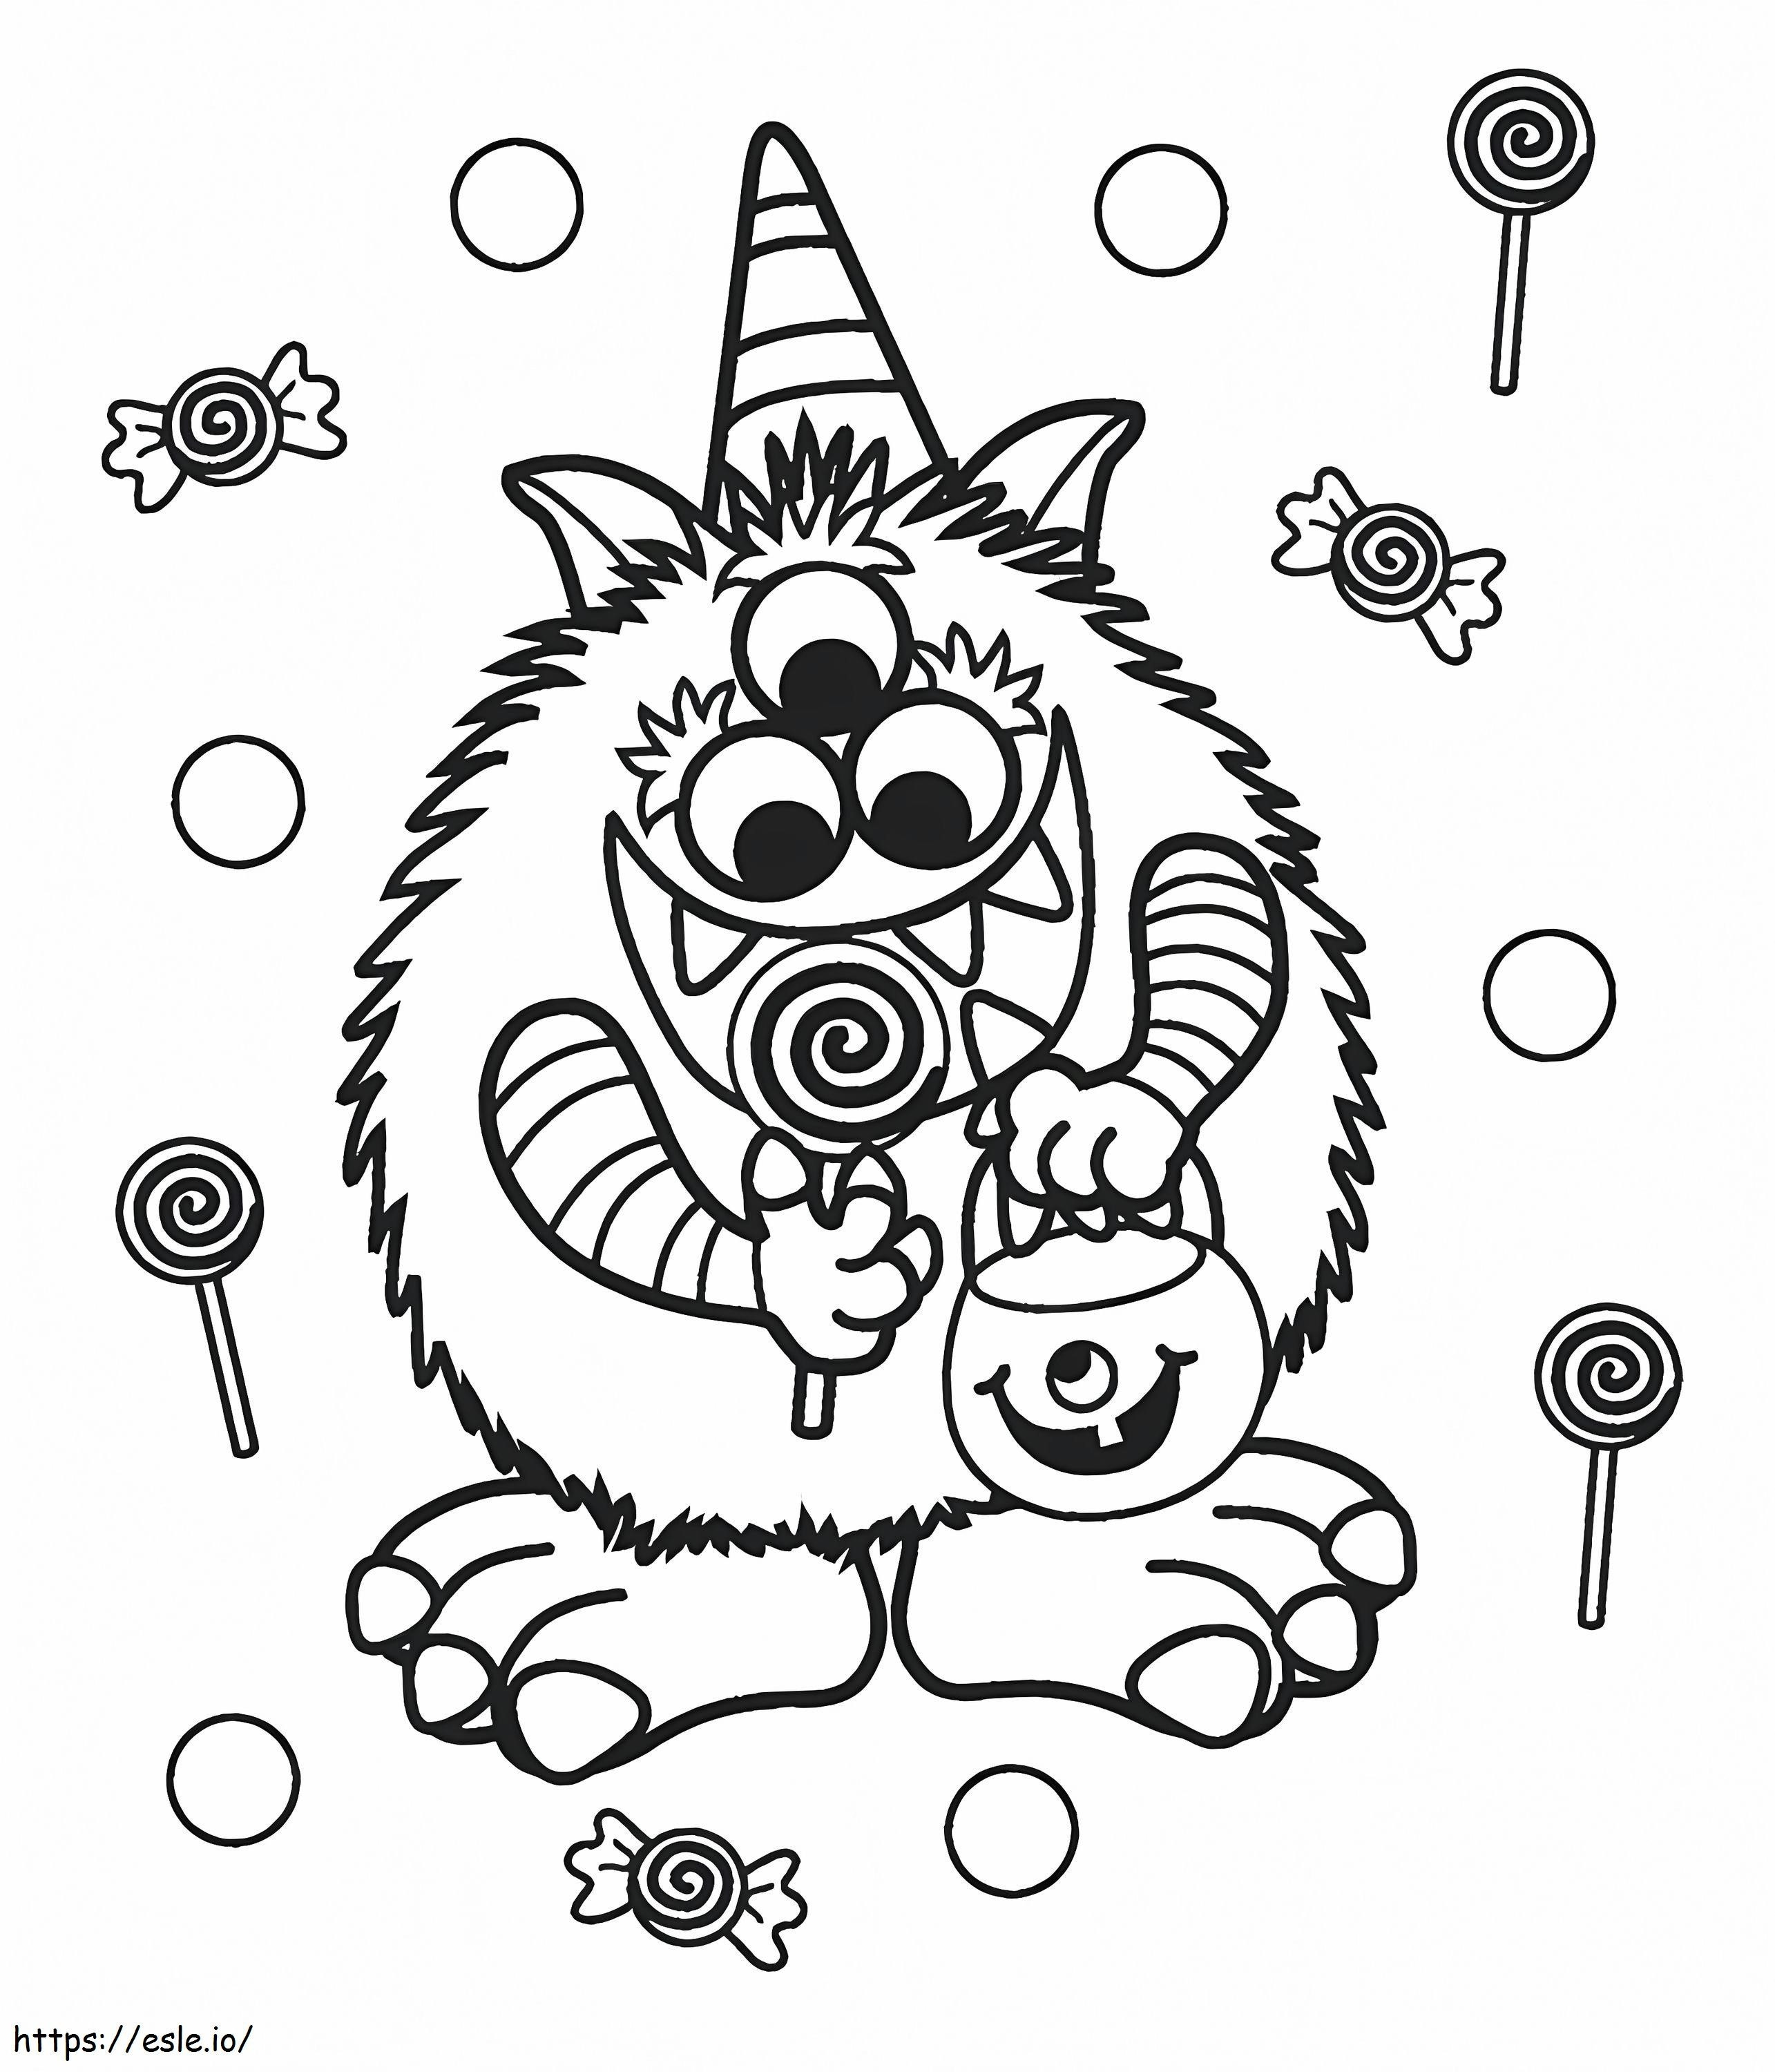 Halloween Candy 9Ncm Halloween Candy Candy Corn Cotton coloring page